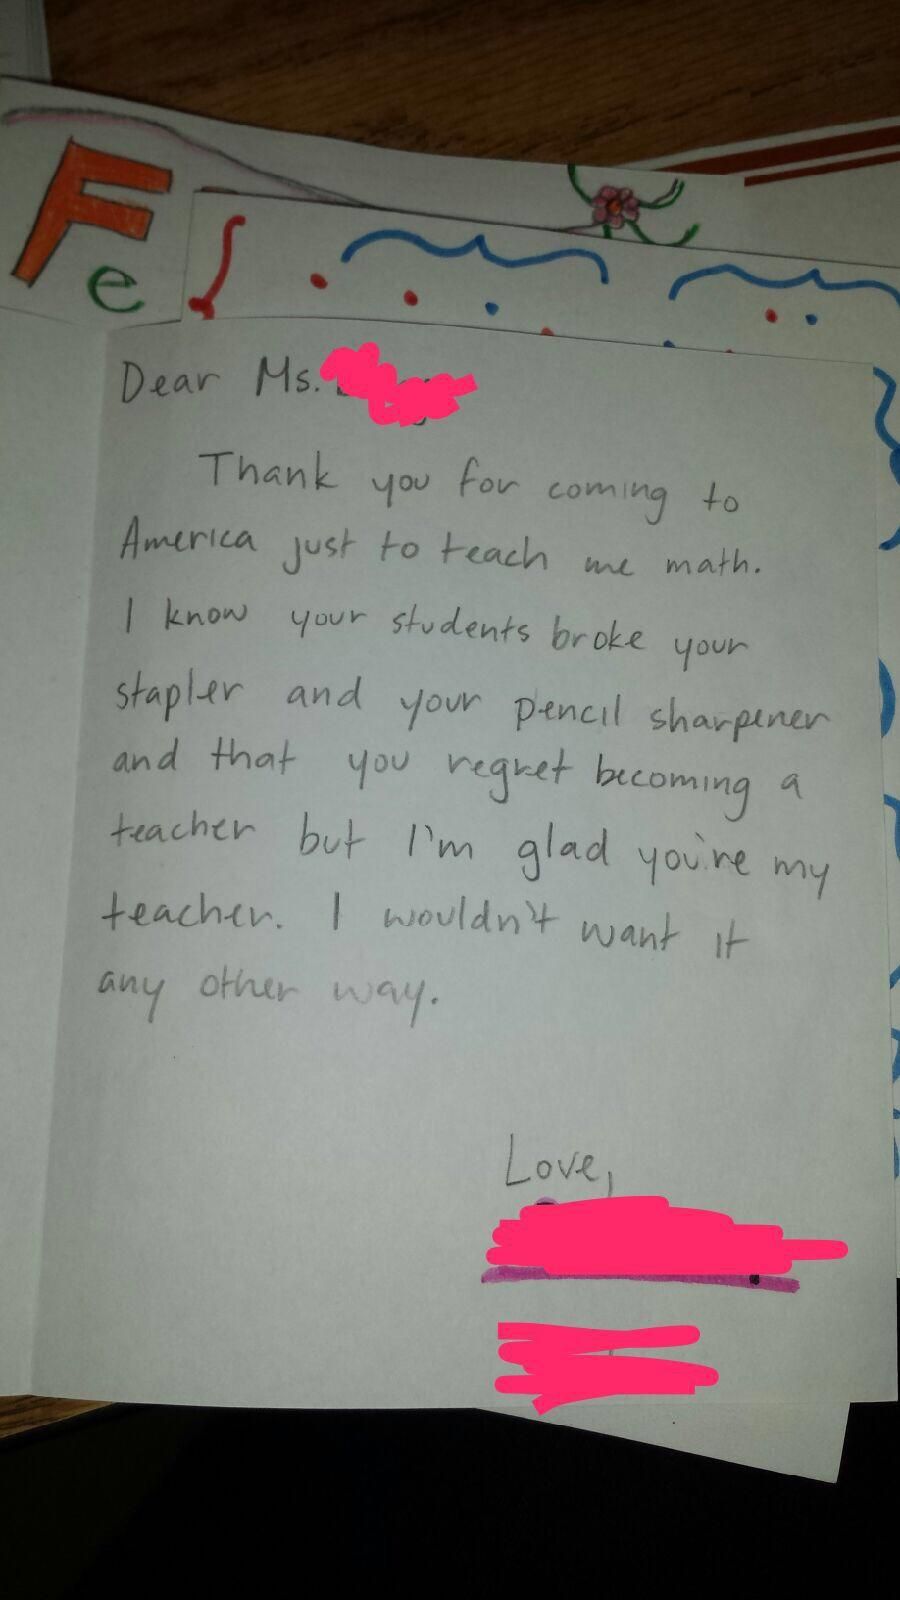 My friend, who is a 5th grade teacher, received this Thank You note from student.